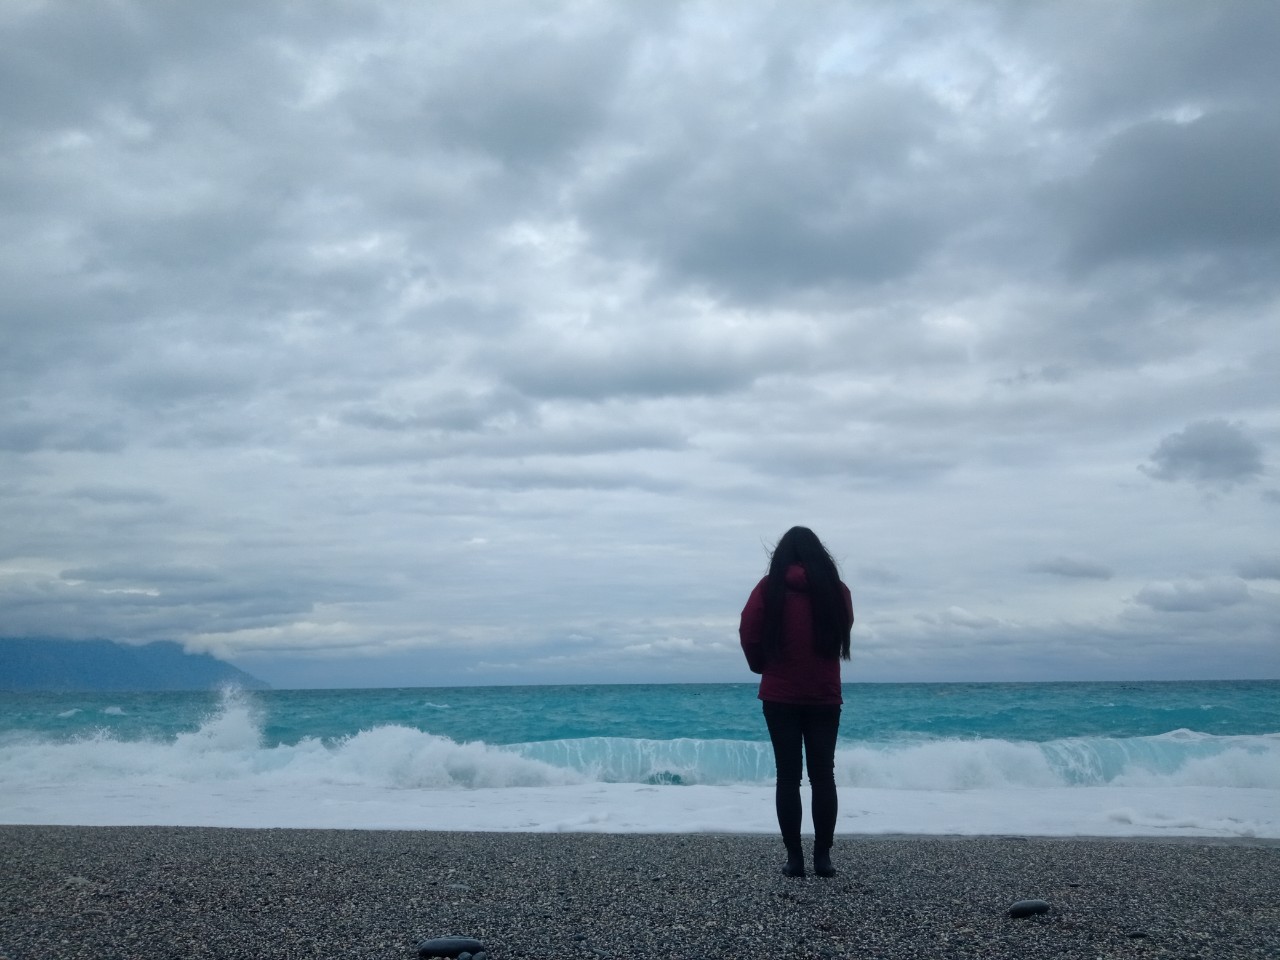 a woman with long hair. her back is to the camera, and she stands on the beach in front of the teal sea.